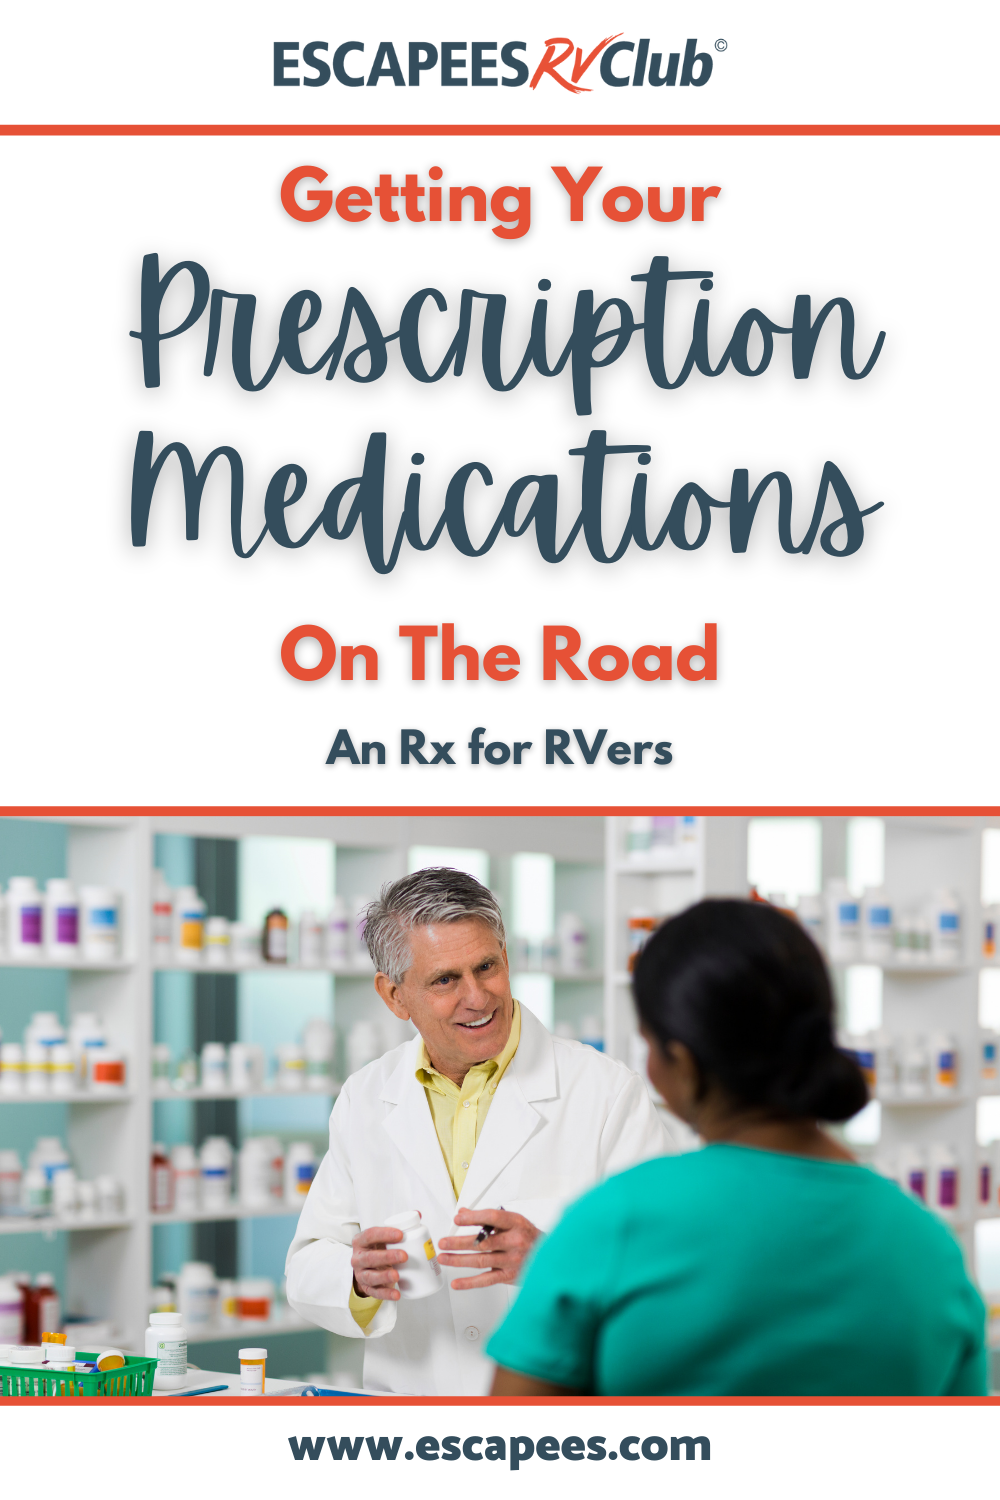 Getting Your Prescription Medications on the Road - An Rx for RVers 3